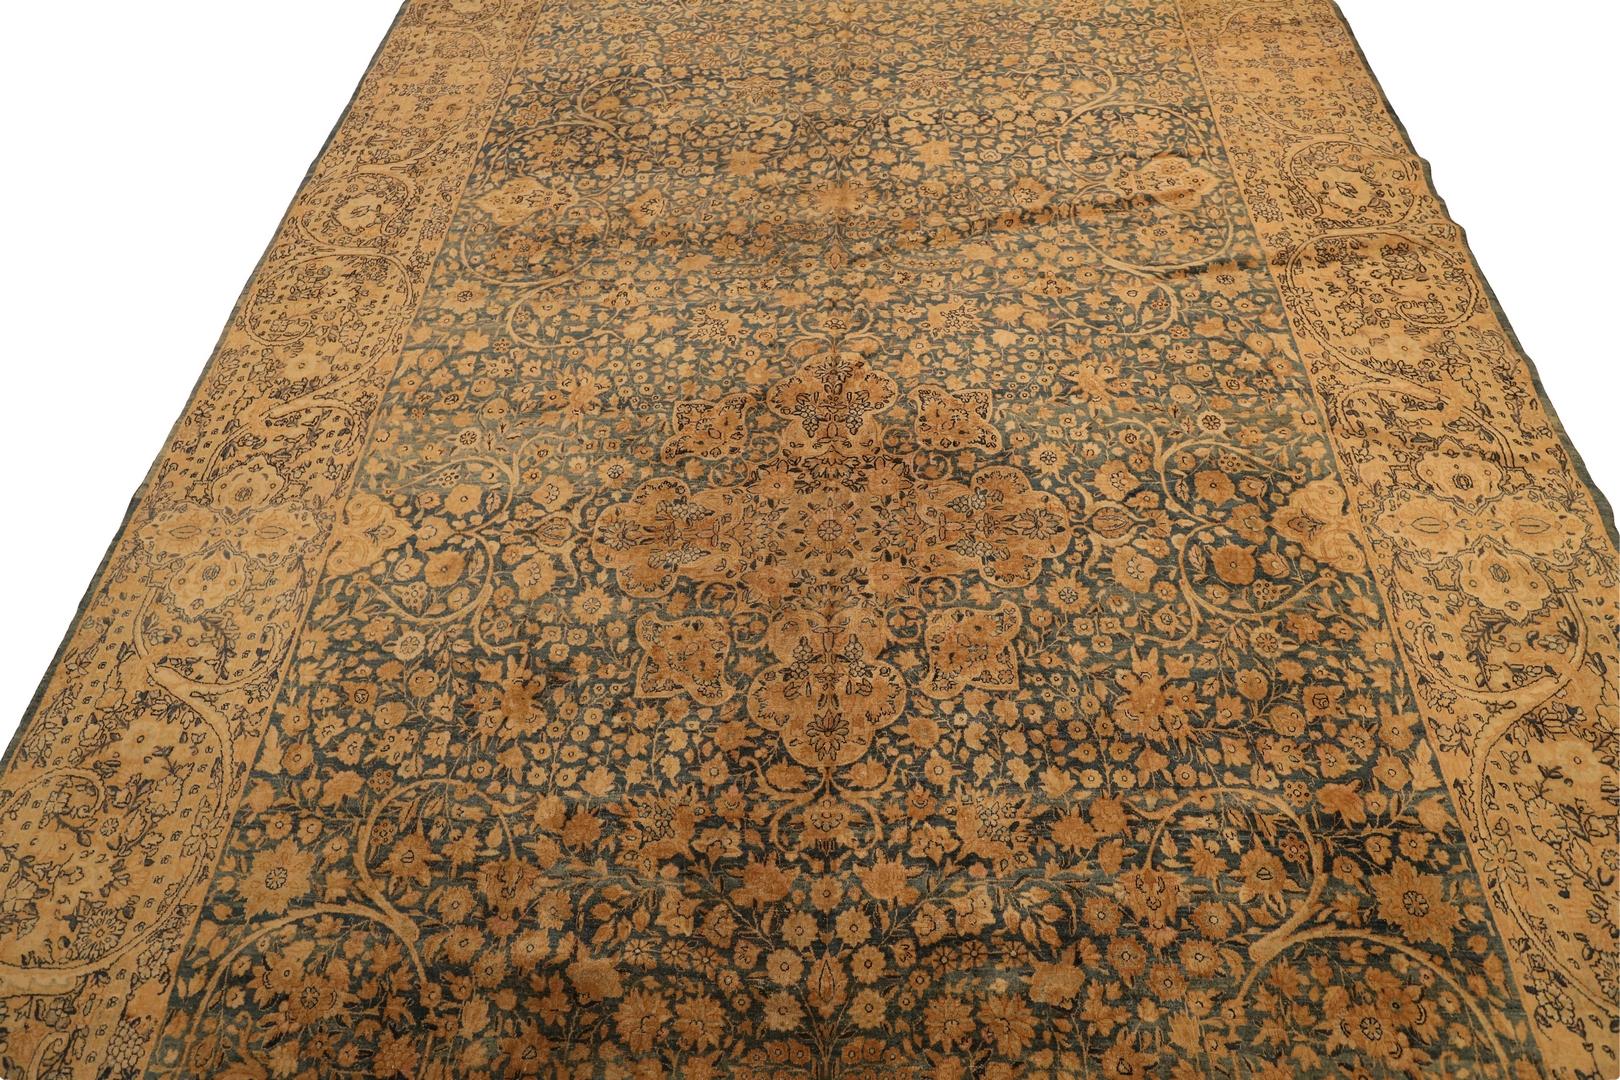 Early 20th Century Kerman Antique Gallery Size Rug, Beige & Light/Medium-Blue - 10 x 19 For Sale